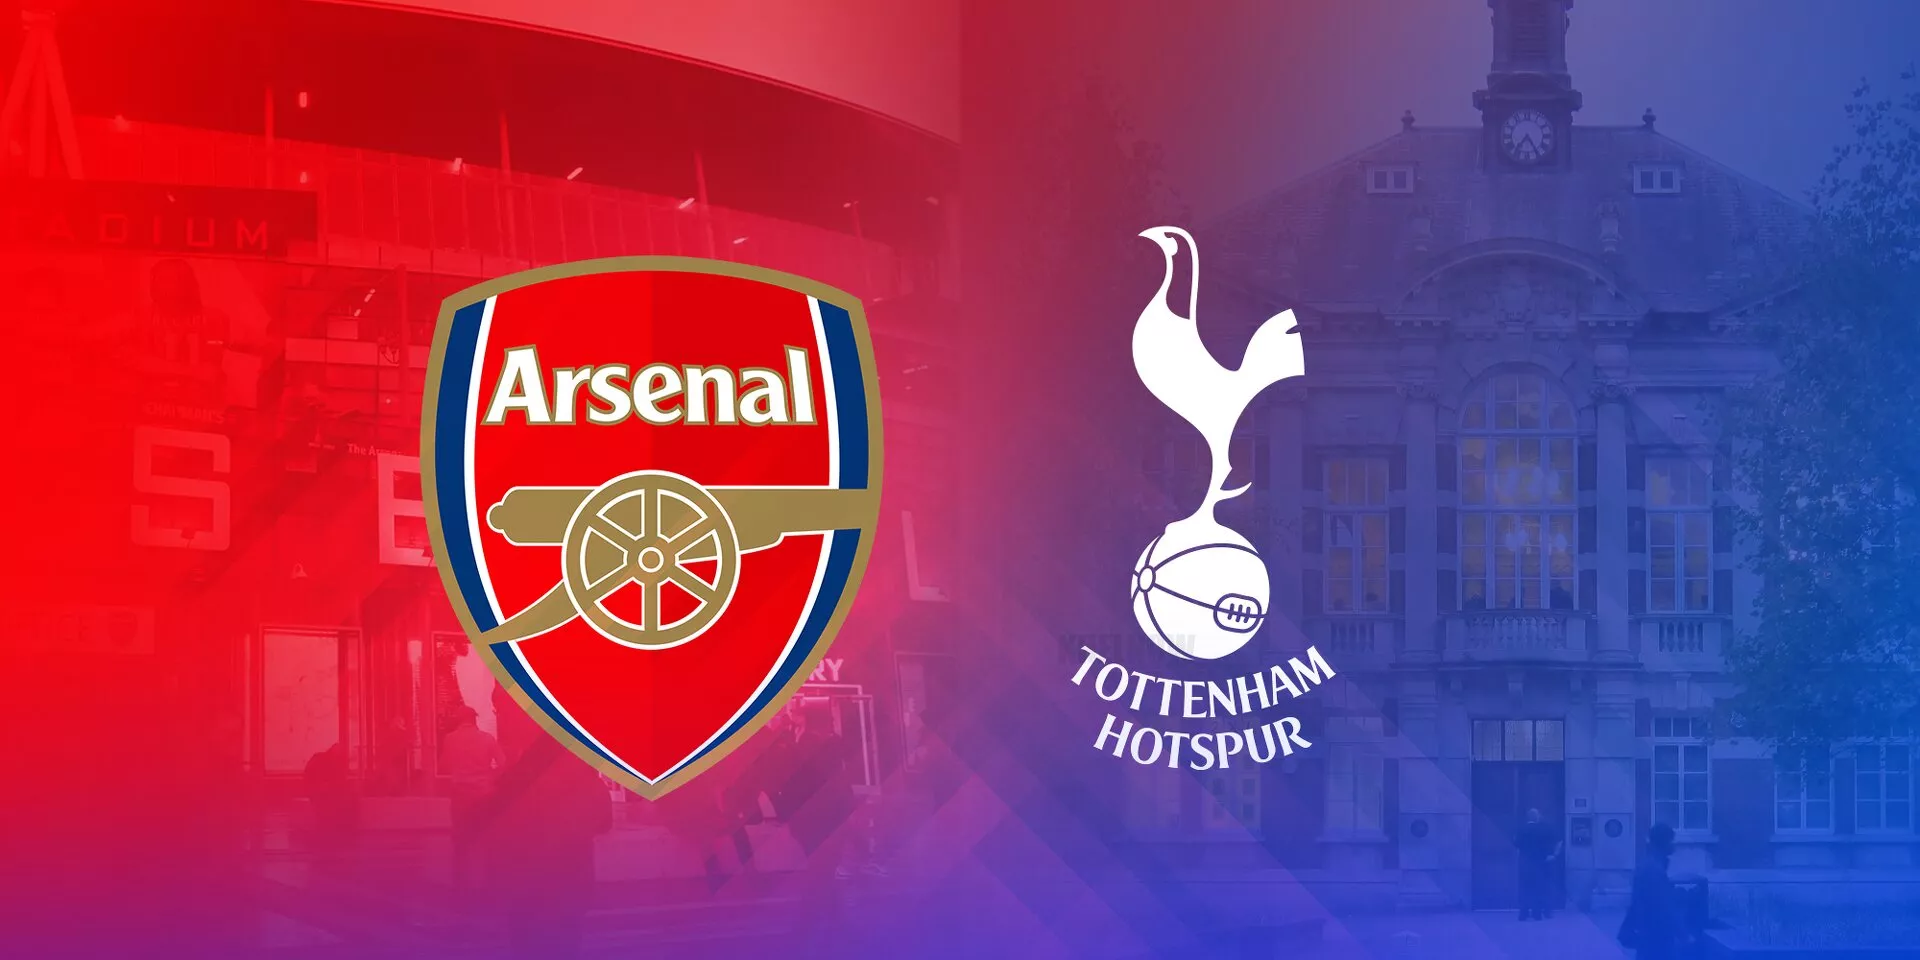 Arsenal vs Tottenham: Where and how to watch?